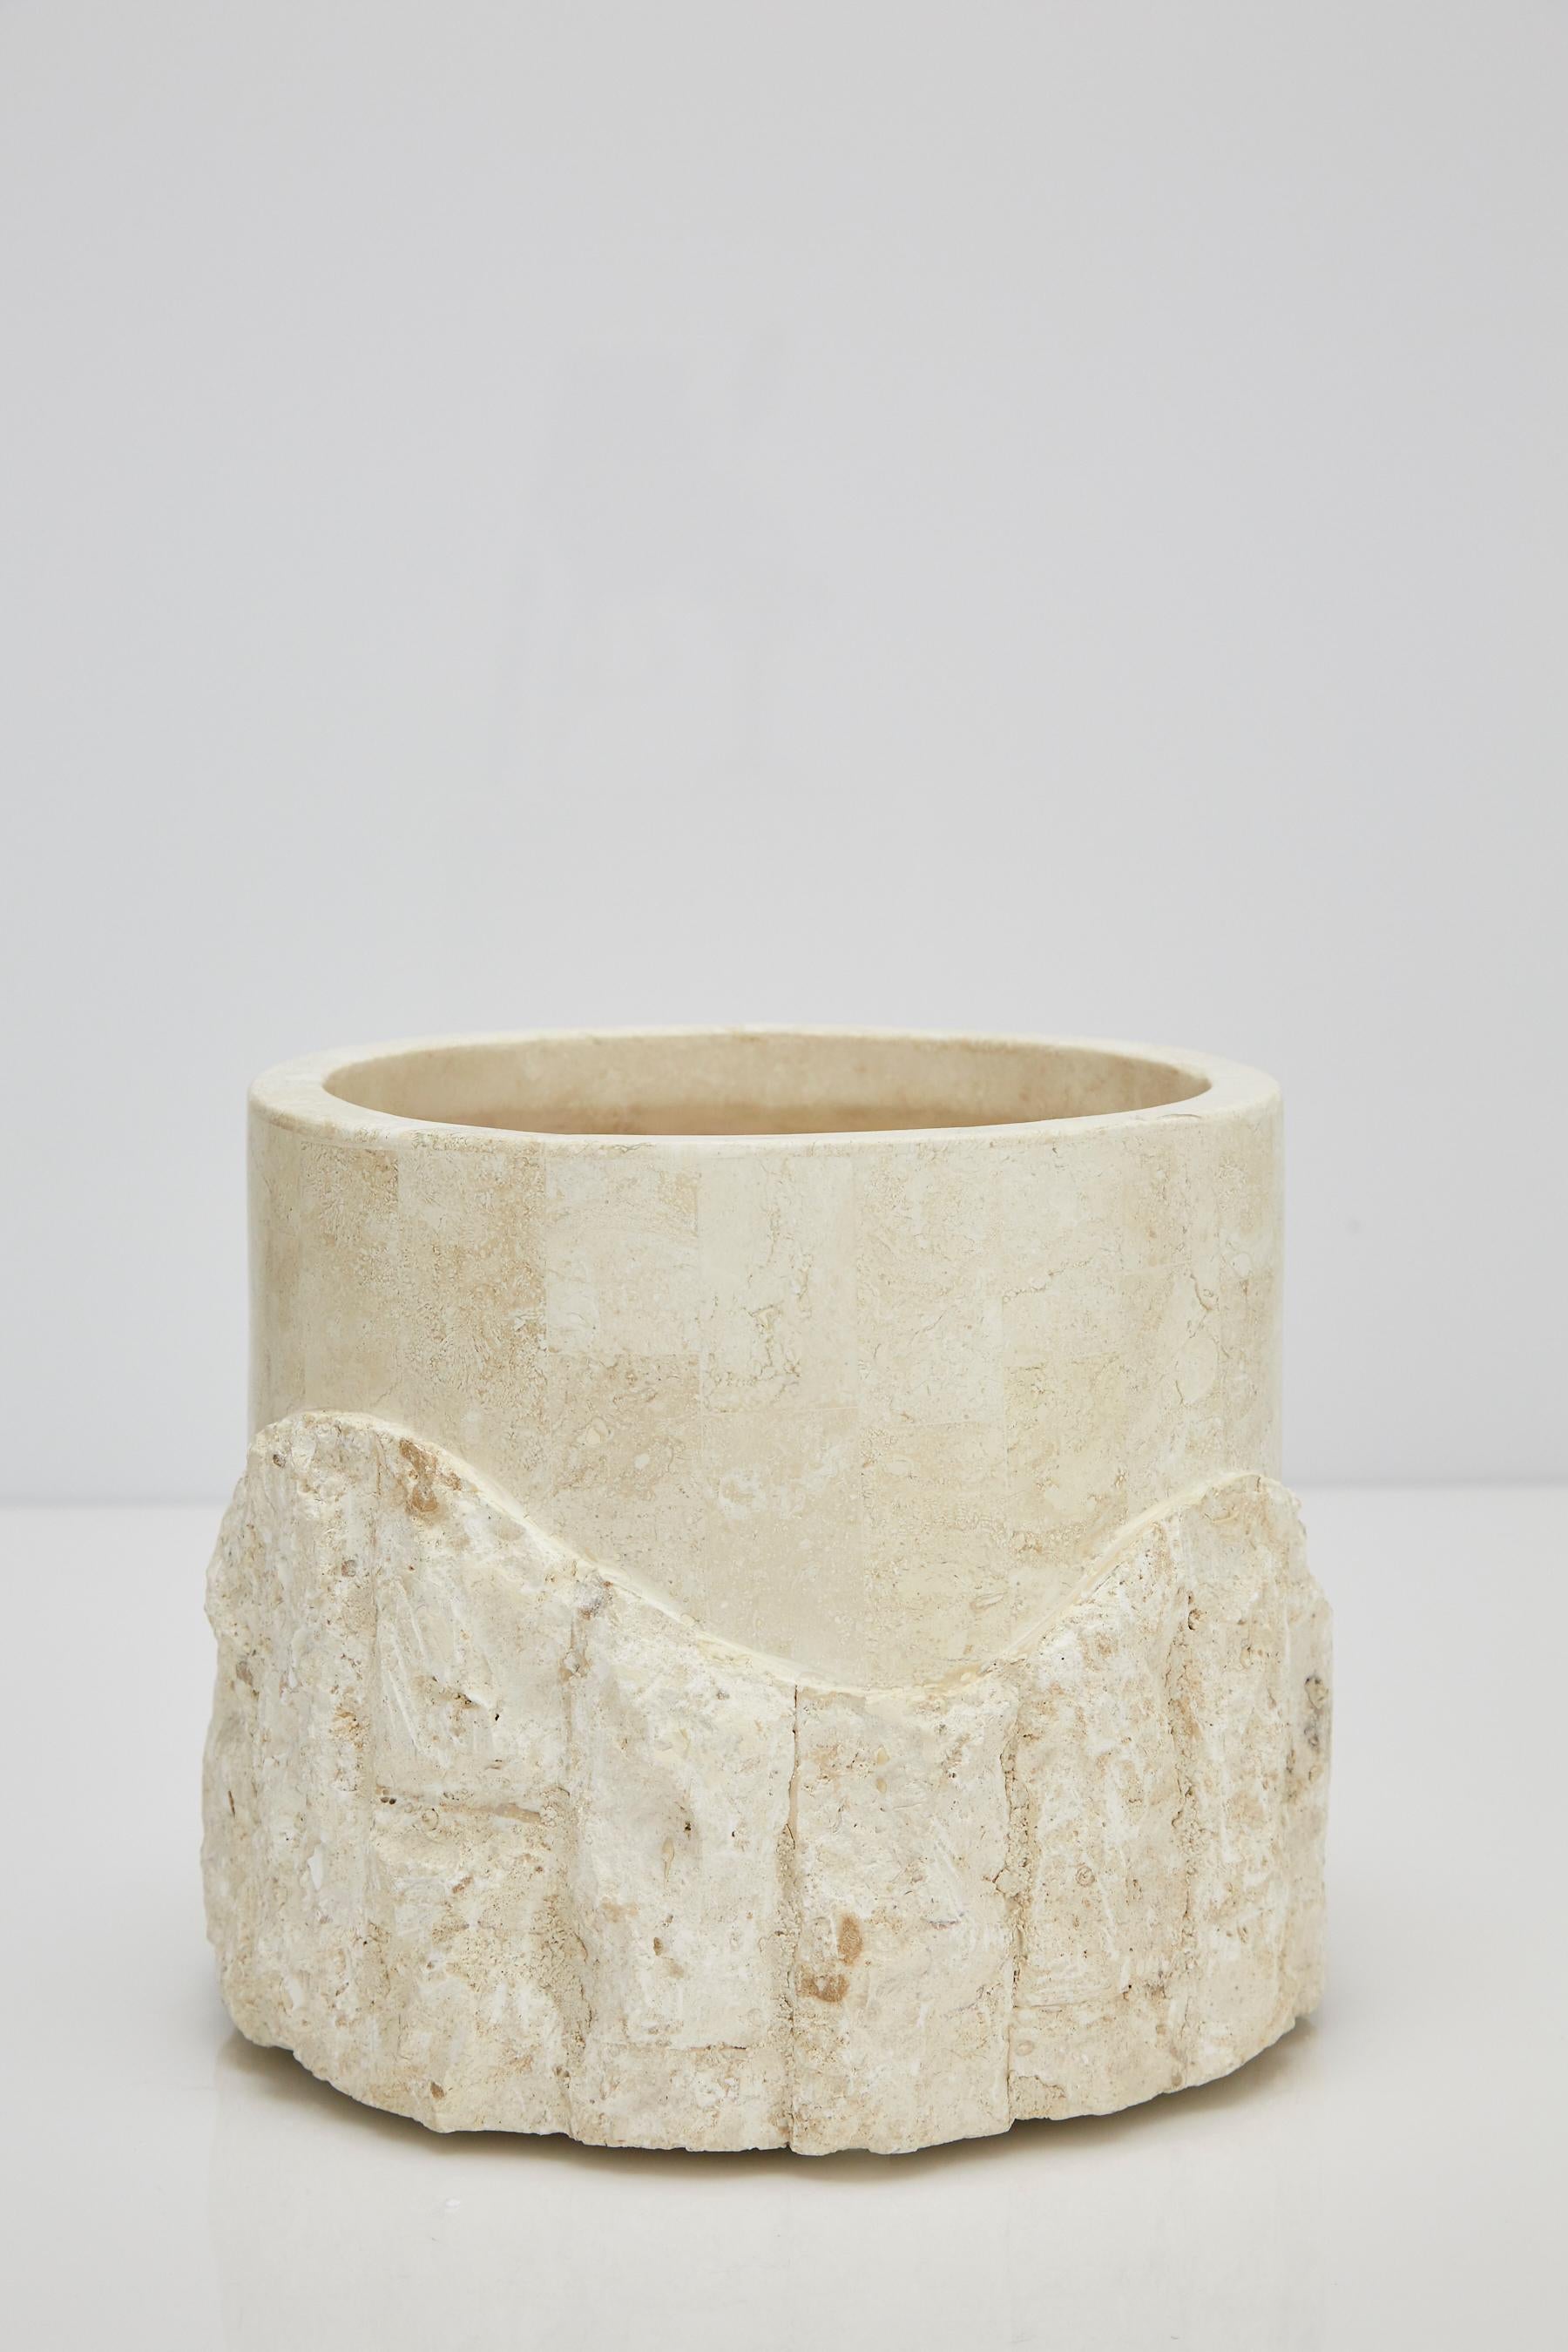 Philippine Small Round Postmodern Tessellated Stone Rough and Smooth Planter, 1990s For Sale